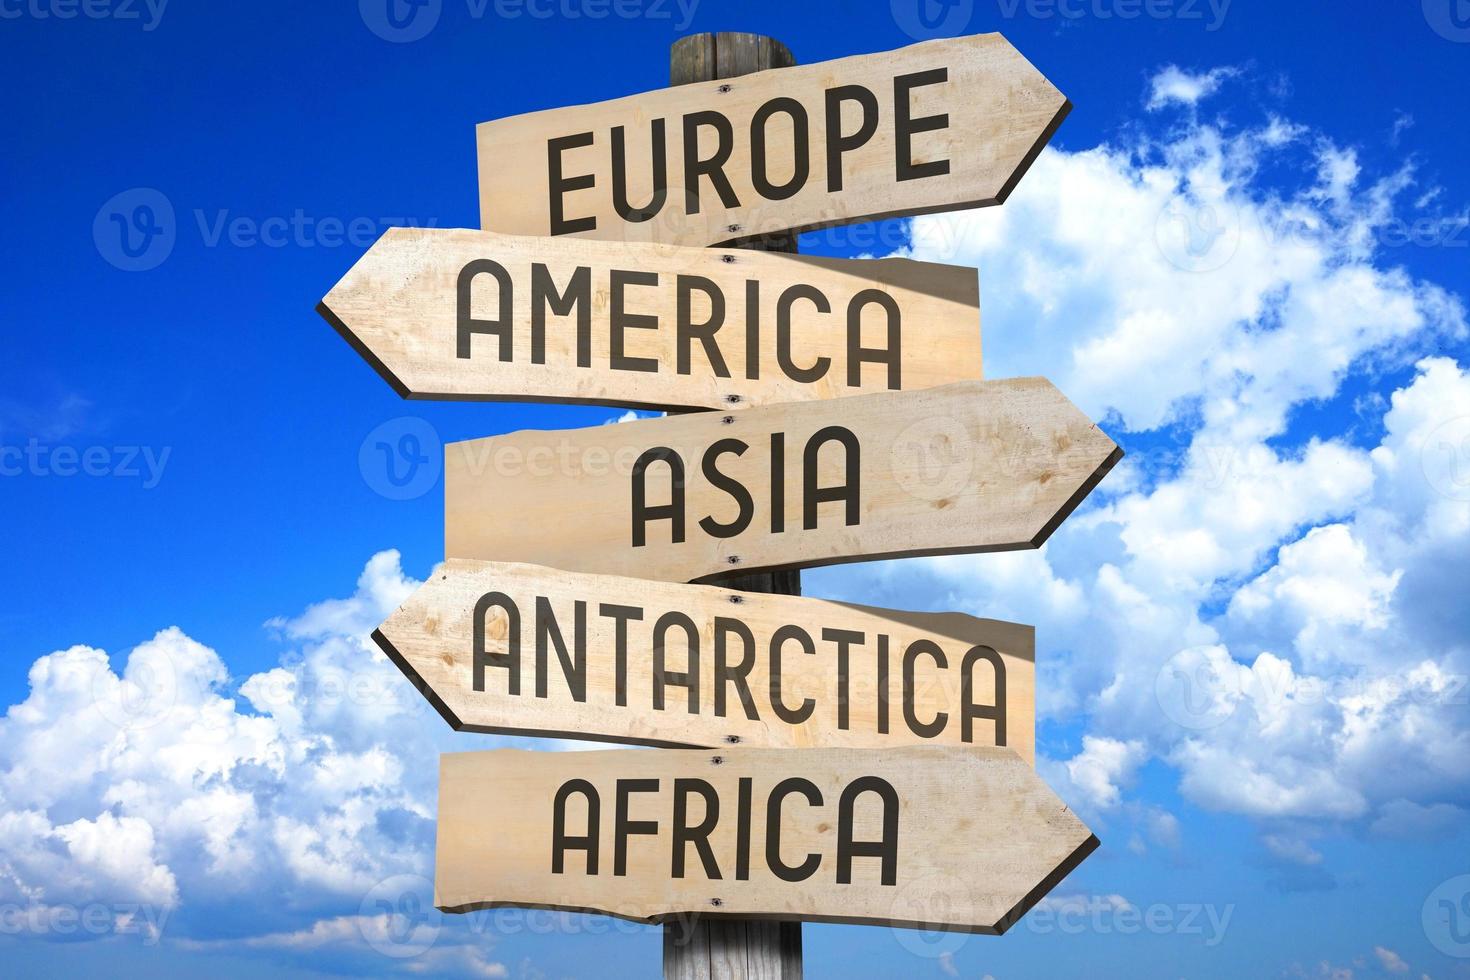 Europe, America, Asia, Antarctica, Africa - Wooden Signpost with Five Arrows photo